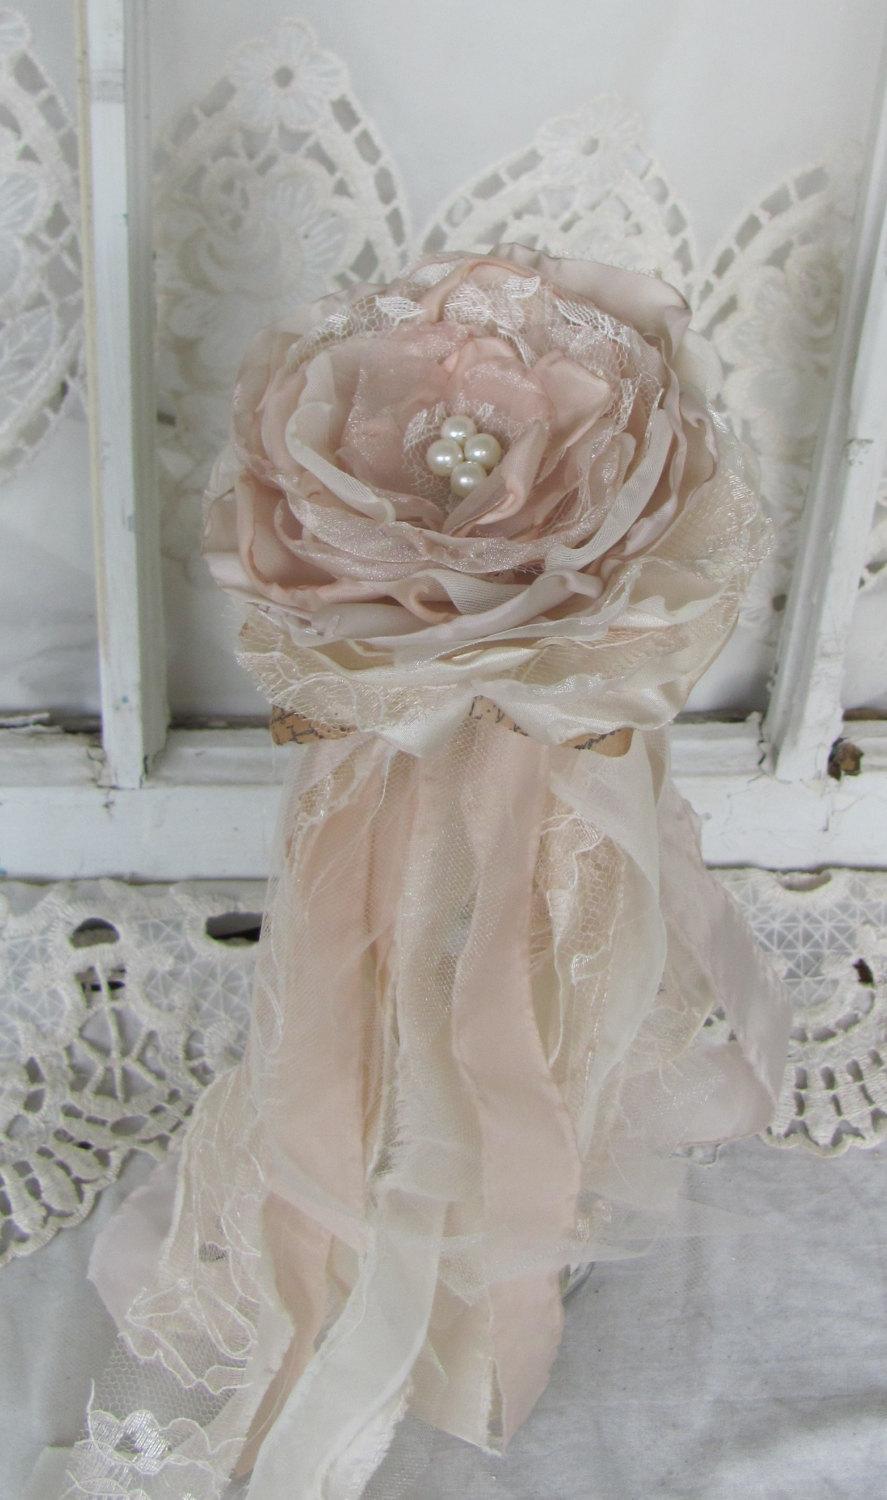 Wedding - Flower Girl Wands, Flower Wand, Flower Girl Accessory, Flower Bouquet, Wedding Accessory in Champagne and Ivory